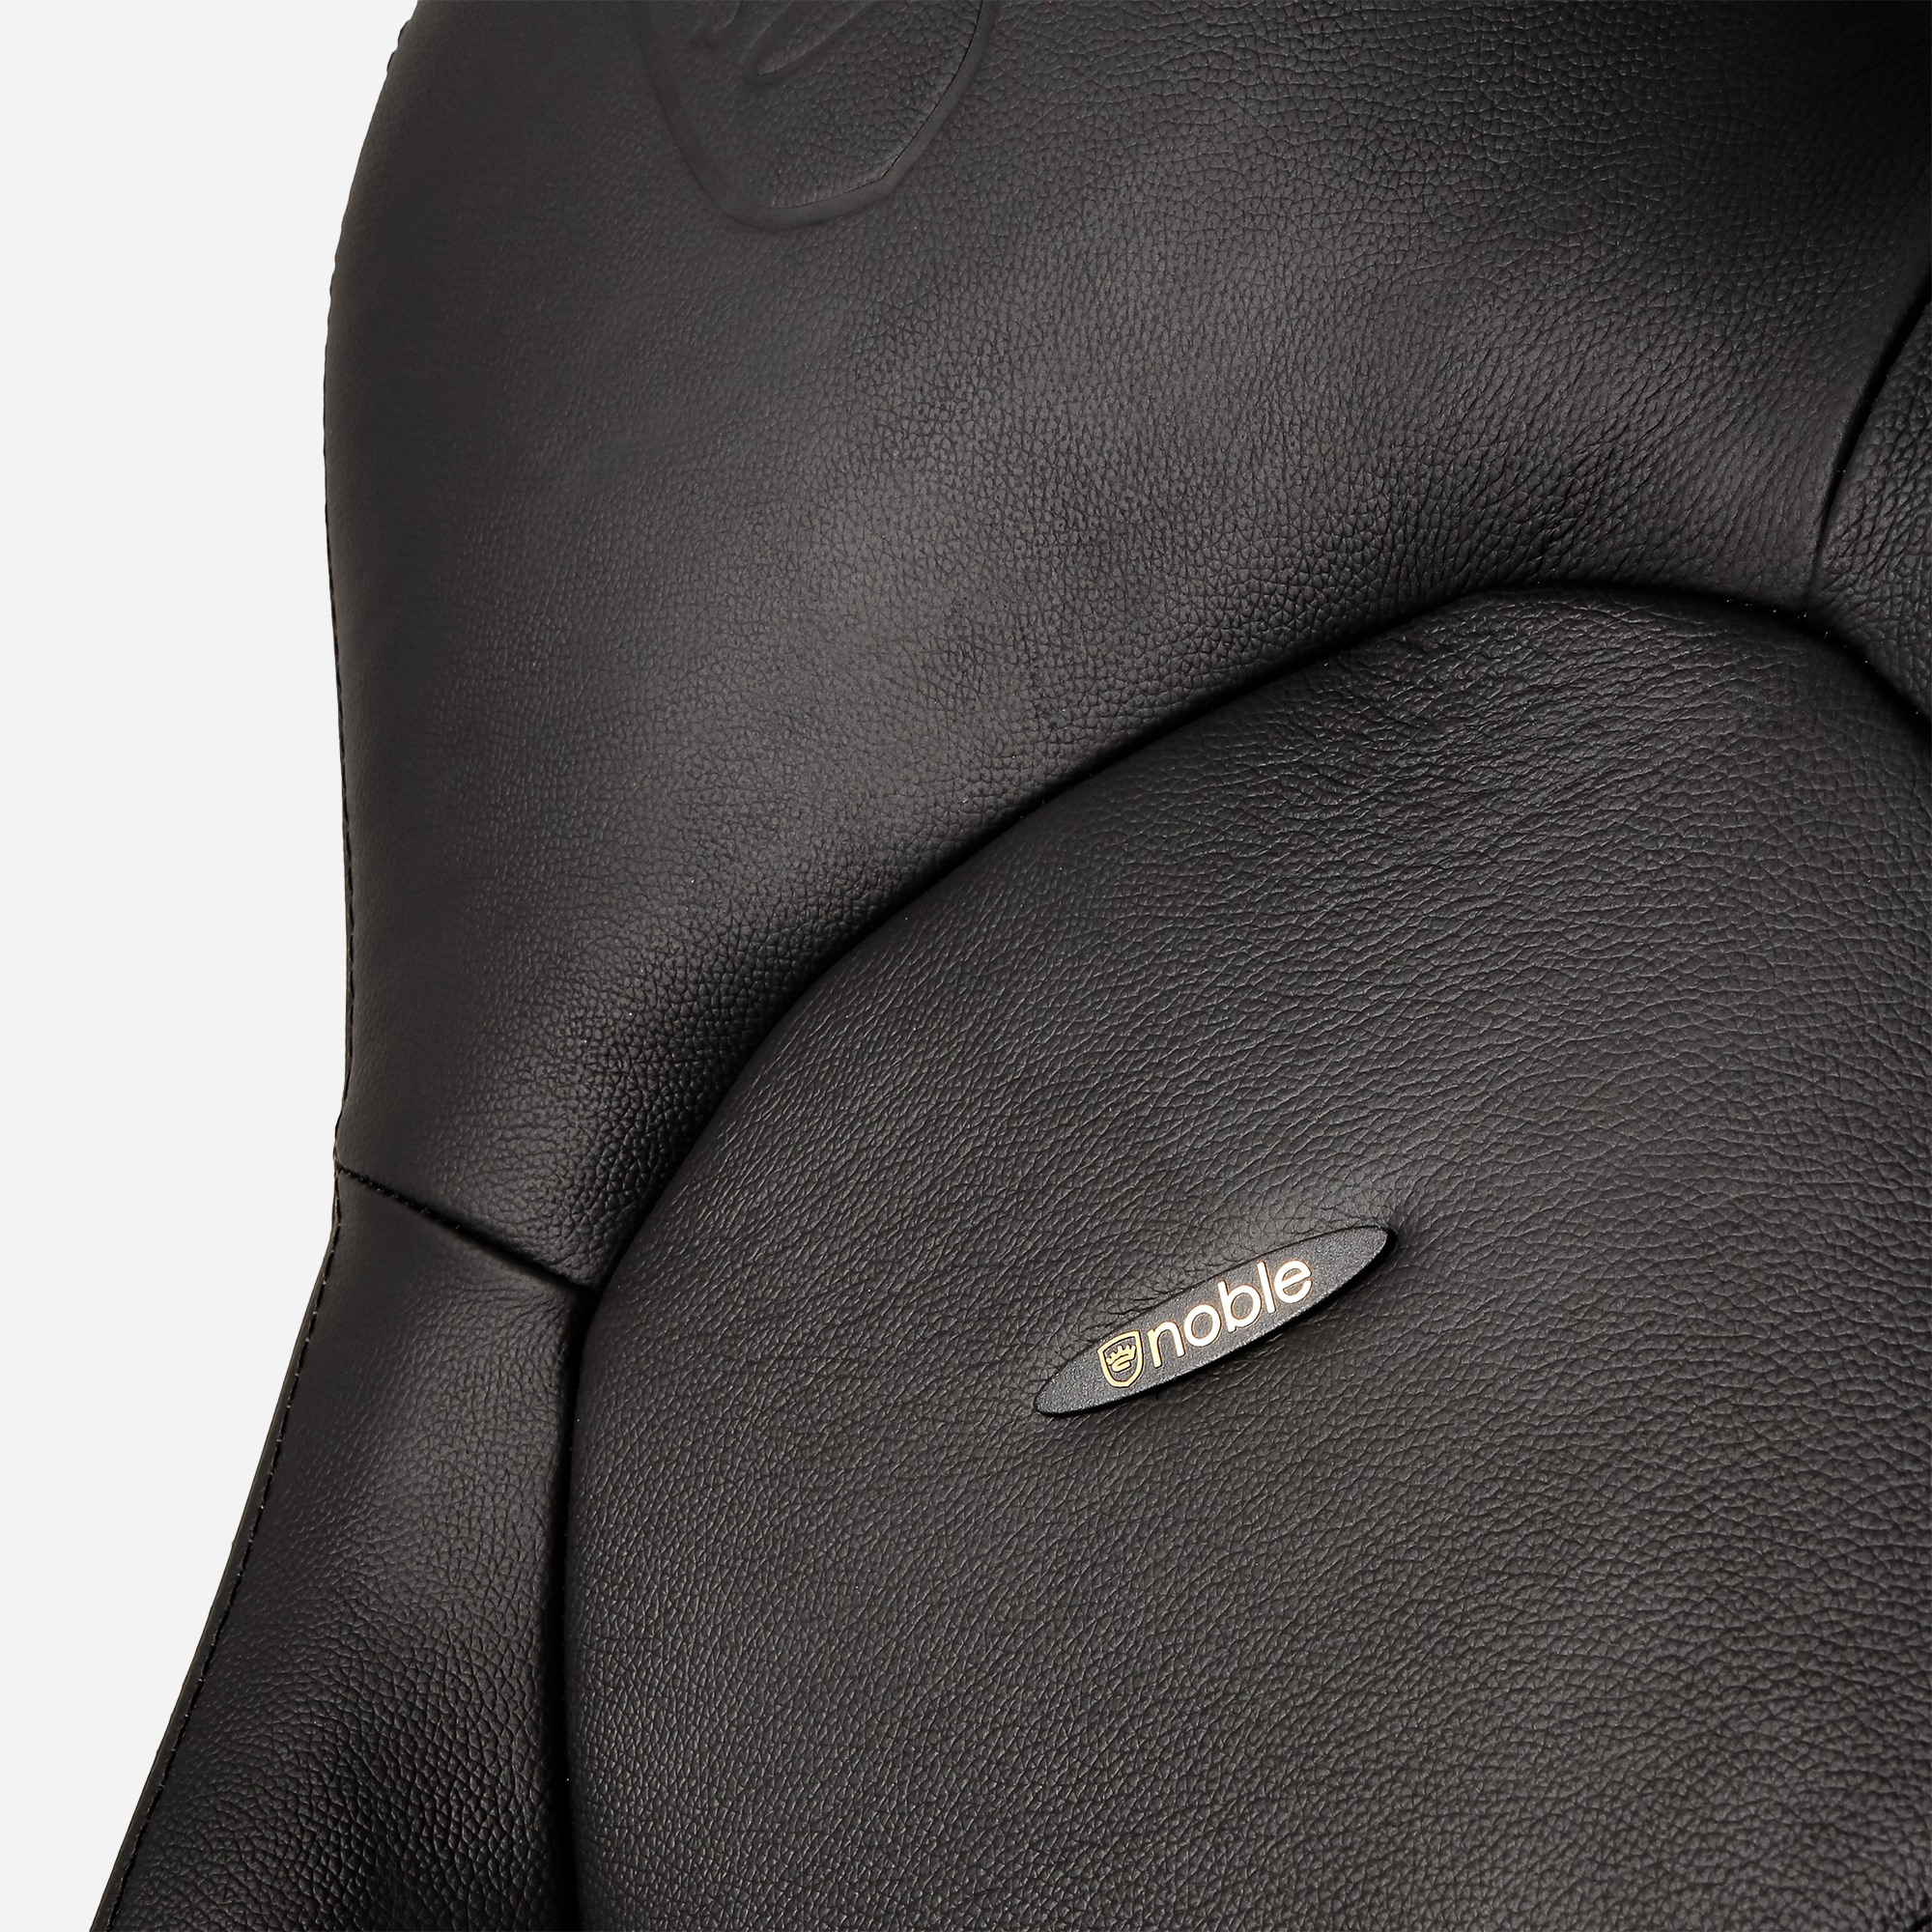 noblechairs - Cadeira noblechairs ICON Real Leather Preto